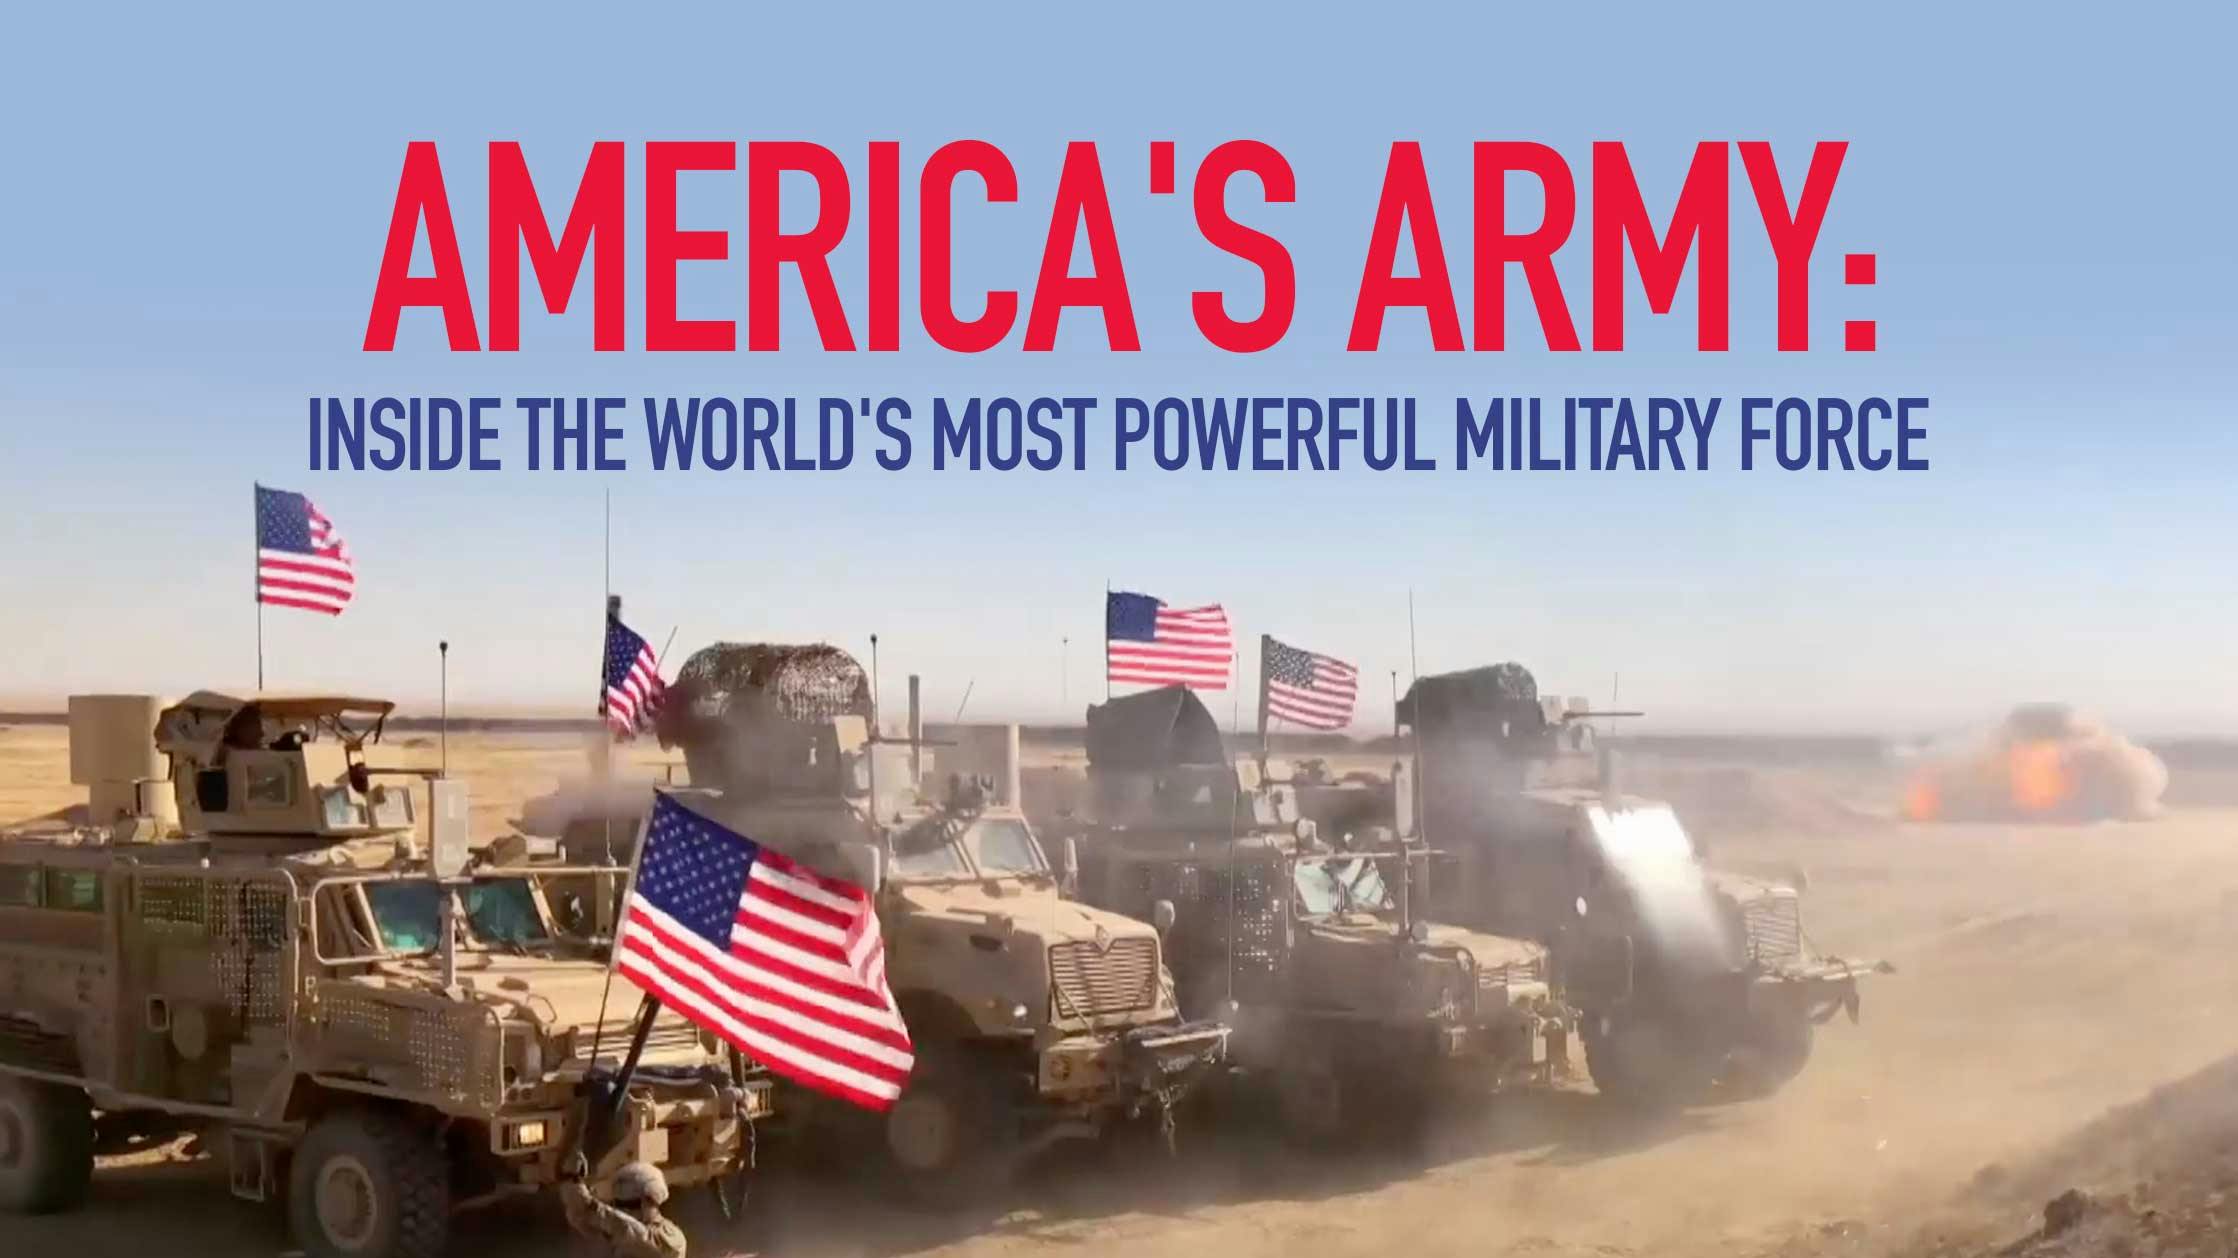 America's Army: Inside The World's Most Powerful Military Force